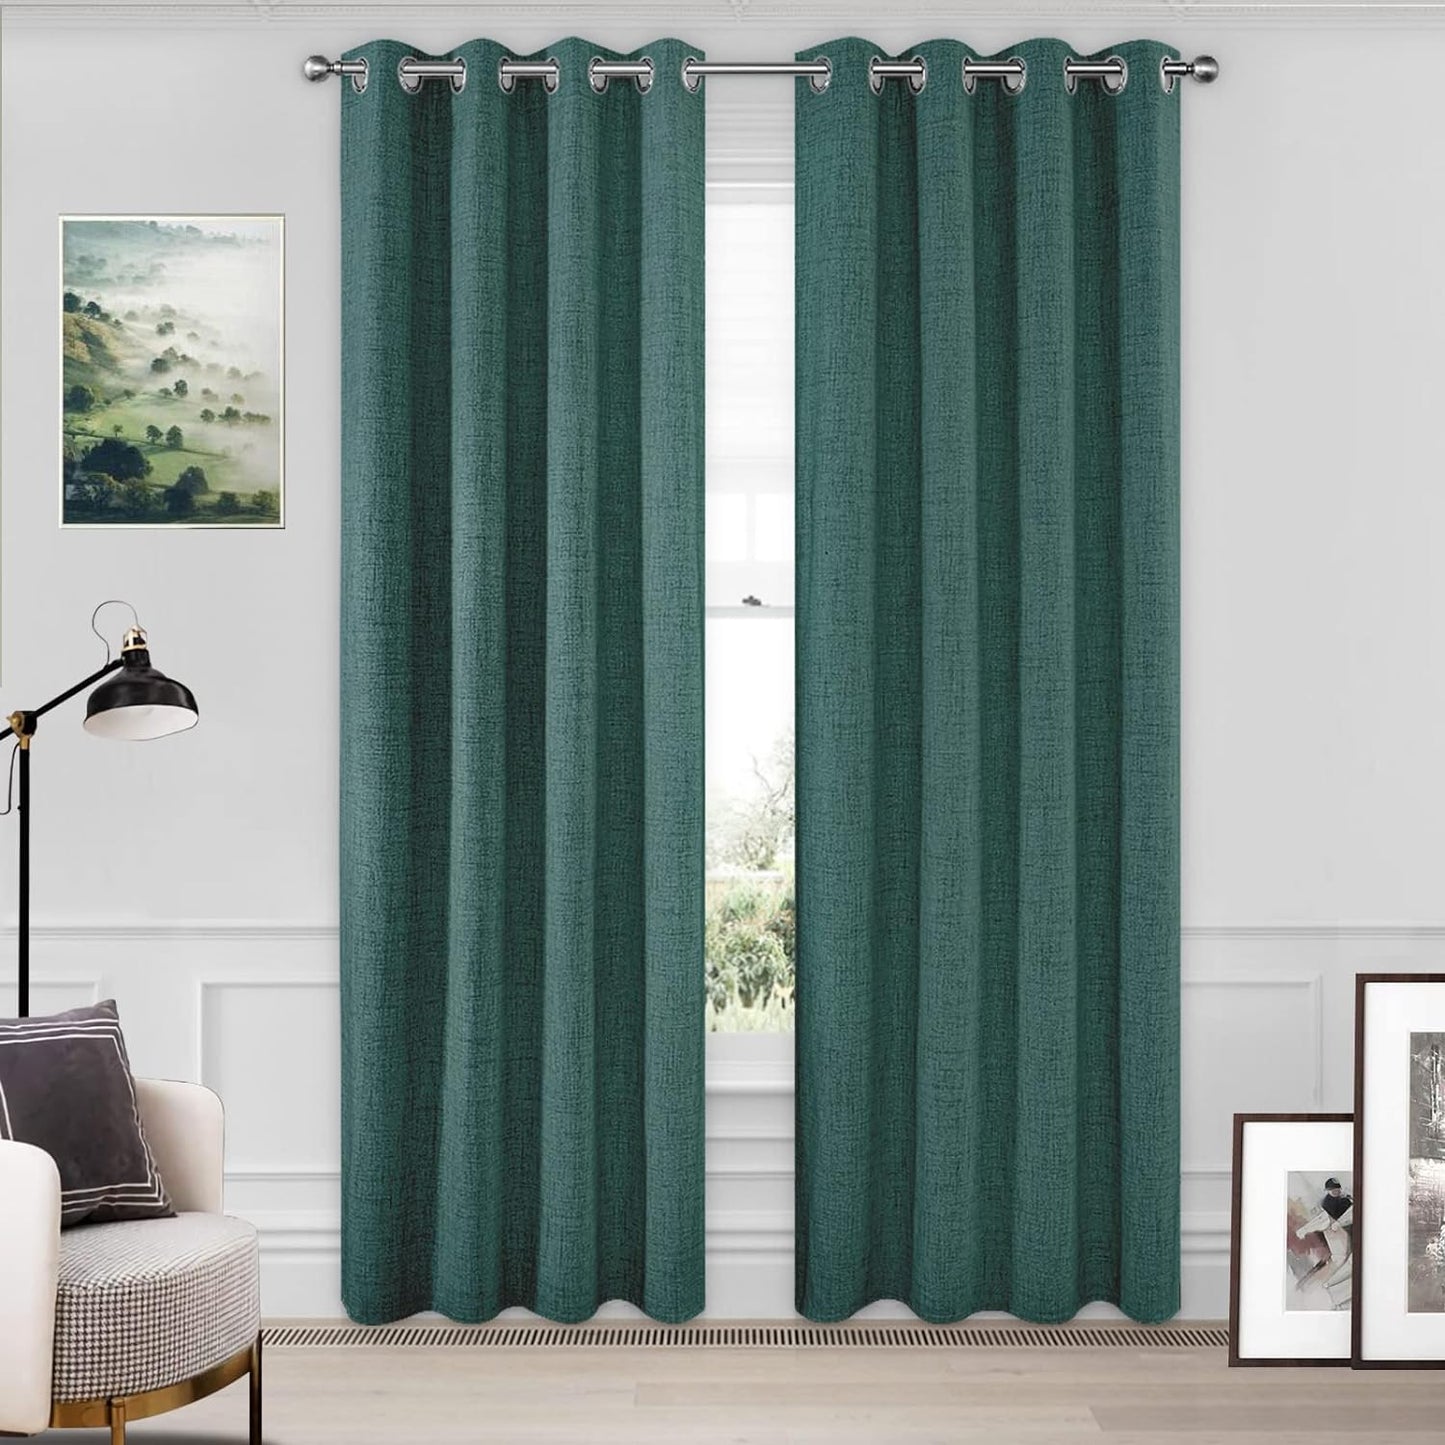 CUCRAF Full Blackout Window Curtains 84 Inches Long,Faux Linen Look Thermal Insulated Grommet Drapes Panels for Bedroom Living Room,Set of 2(52 X 84 Inches, Light Khaki)  CUCRAF Hunter Green 52 X 84 Inches 